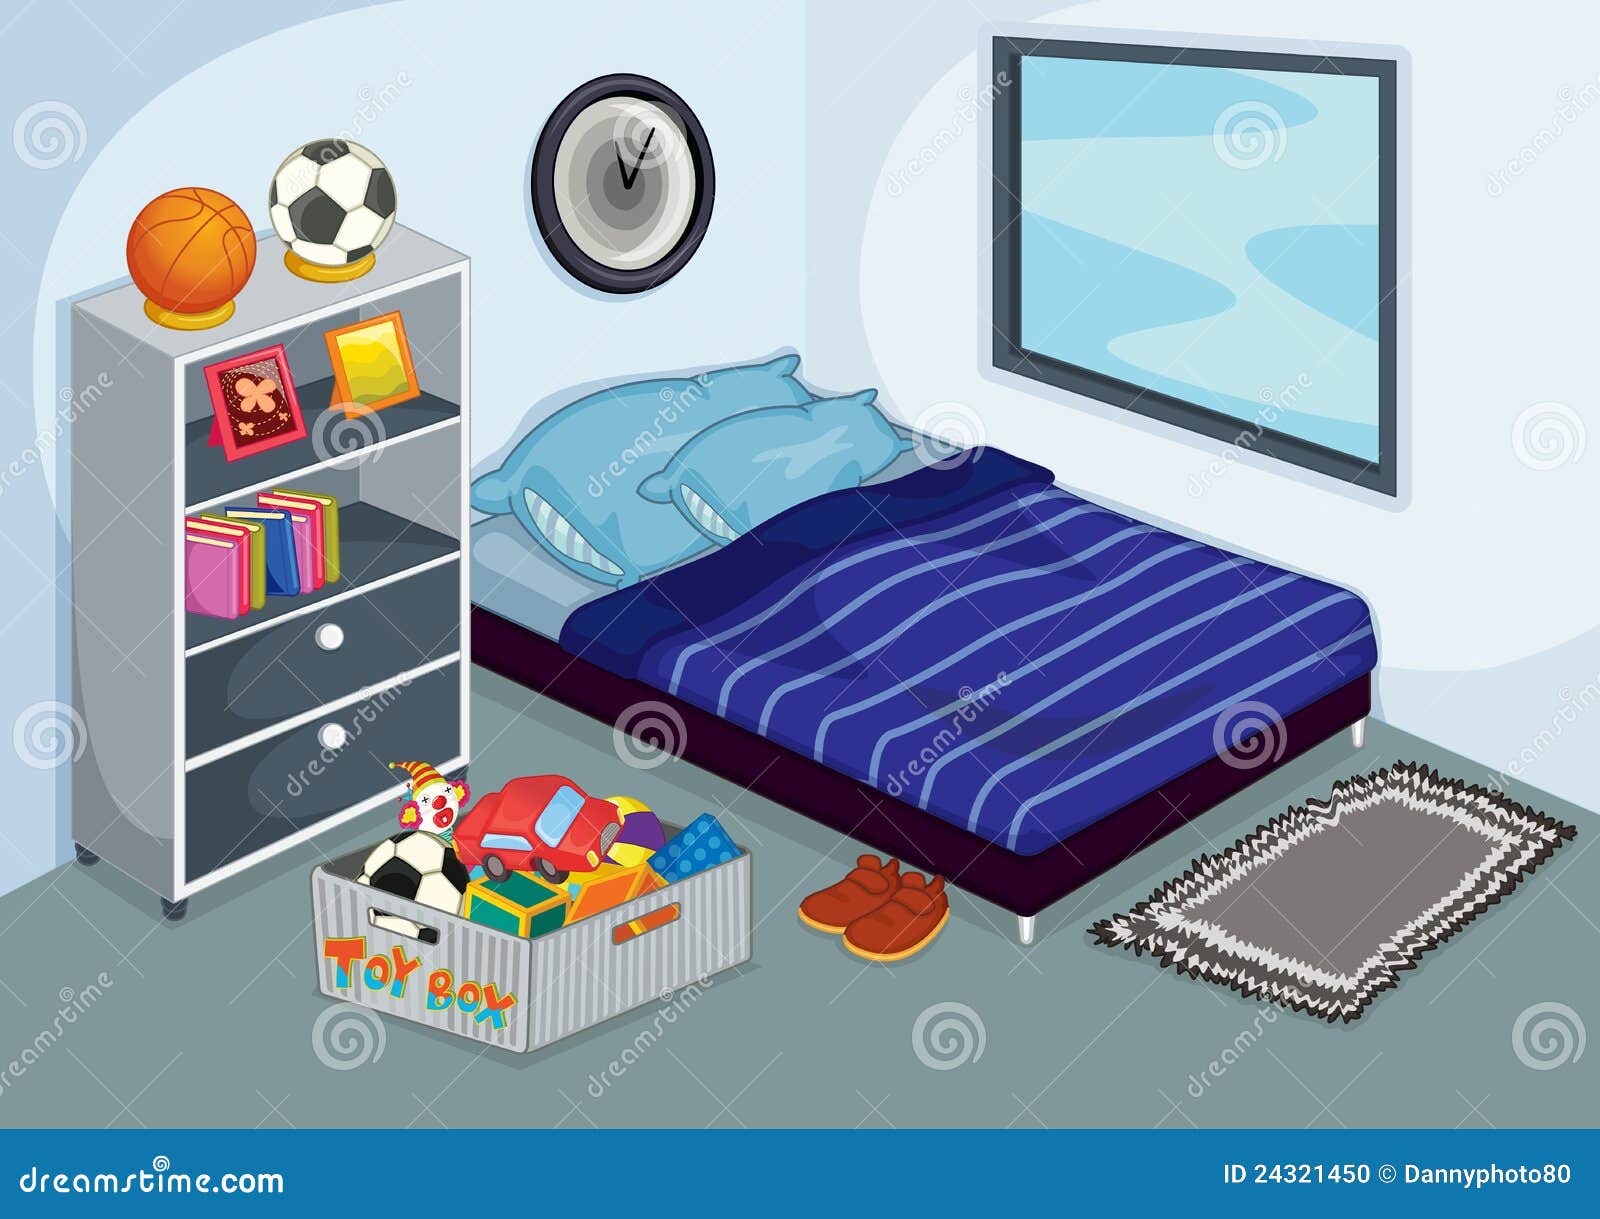 Clean Bedroom Clip Art | CDxND.com - Home Design in Pictures